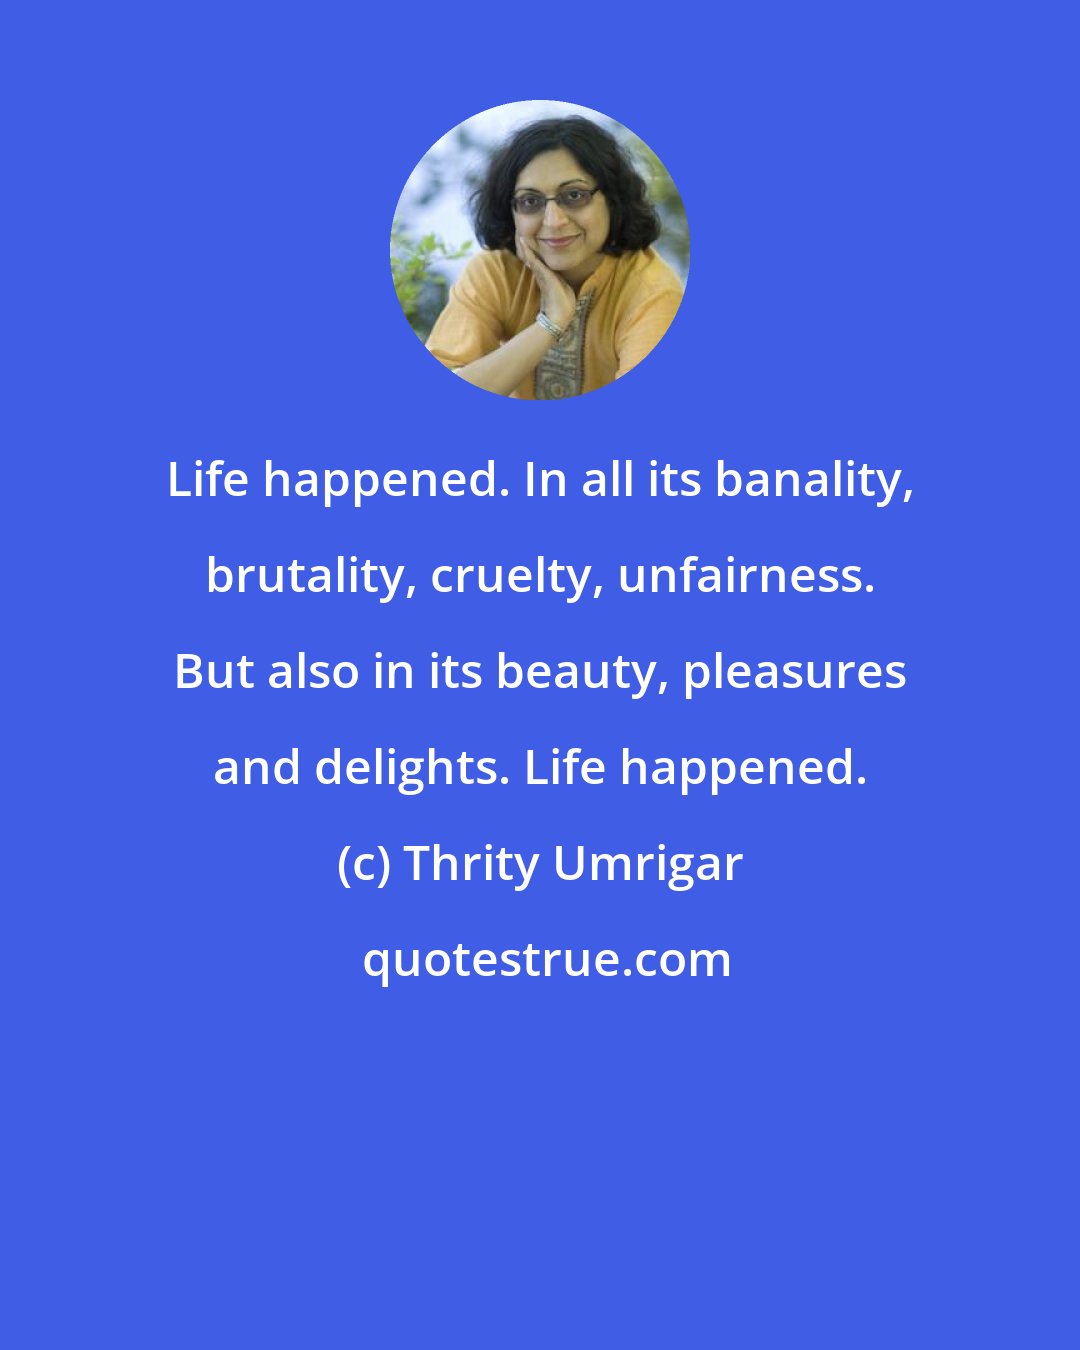 Thrity Umrigar: Life happened. In all its banality, brutality, cruelty, unfairness. But also in its beauty, pleasures and delights. Life happened.